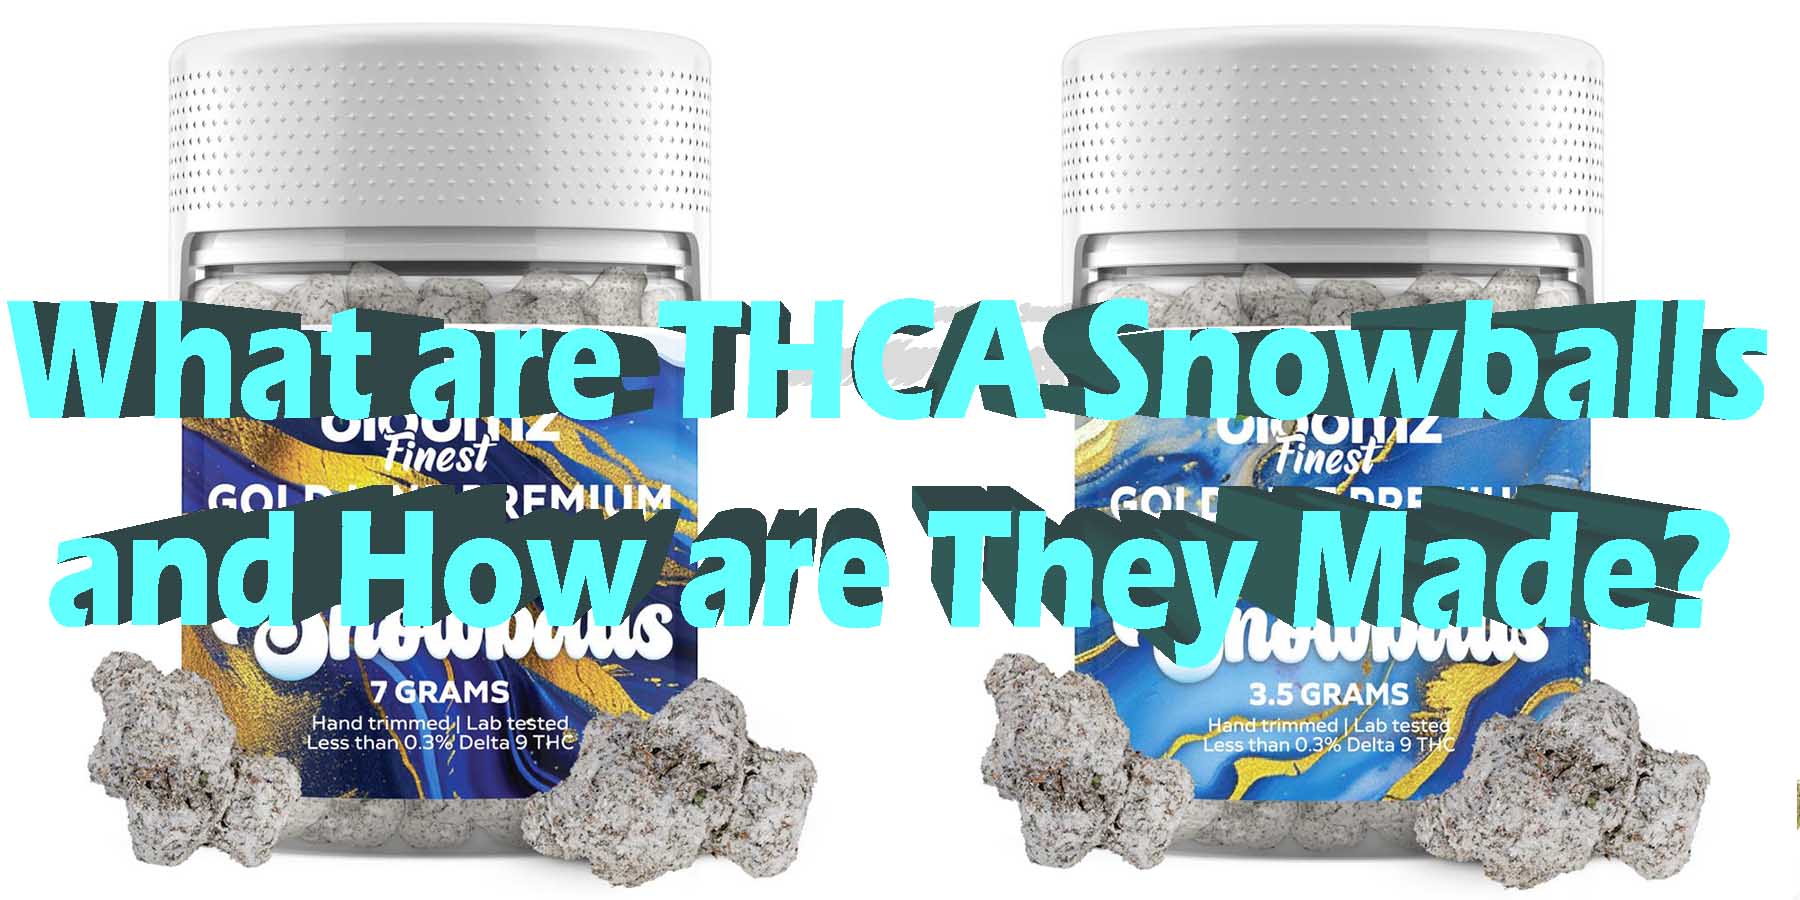 What are THCA Flower Snowballs and How are They Made LowestPrice Coupon Discount For Smoking Best High Smoke Shop Online Near Me Online Smoke Shop StrongestBrand Best Smoke Bloomz